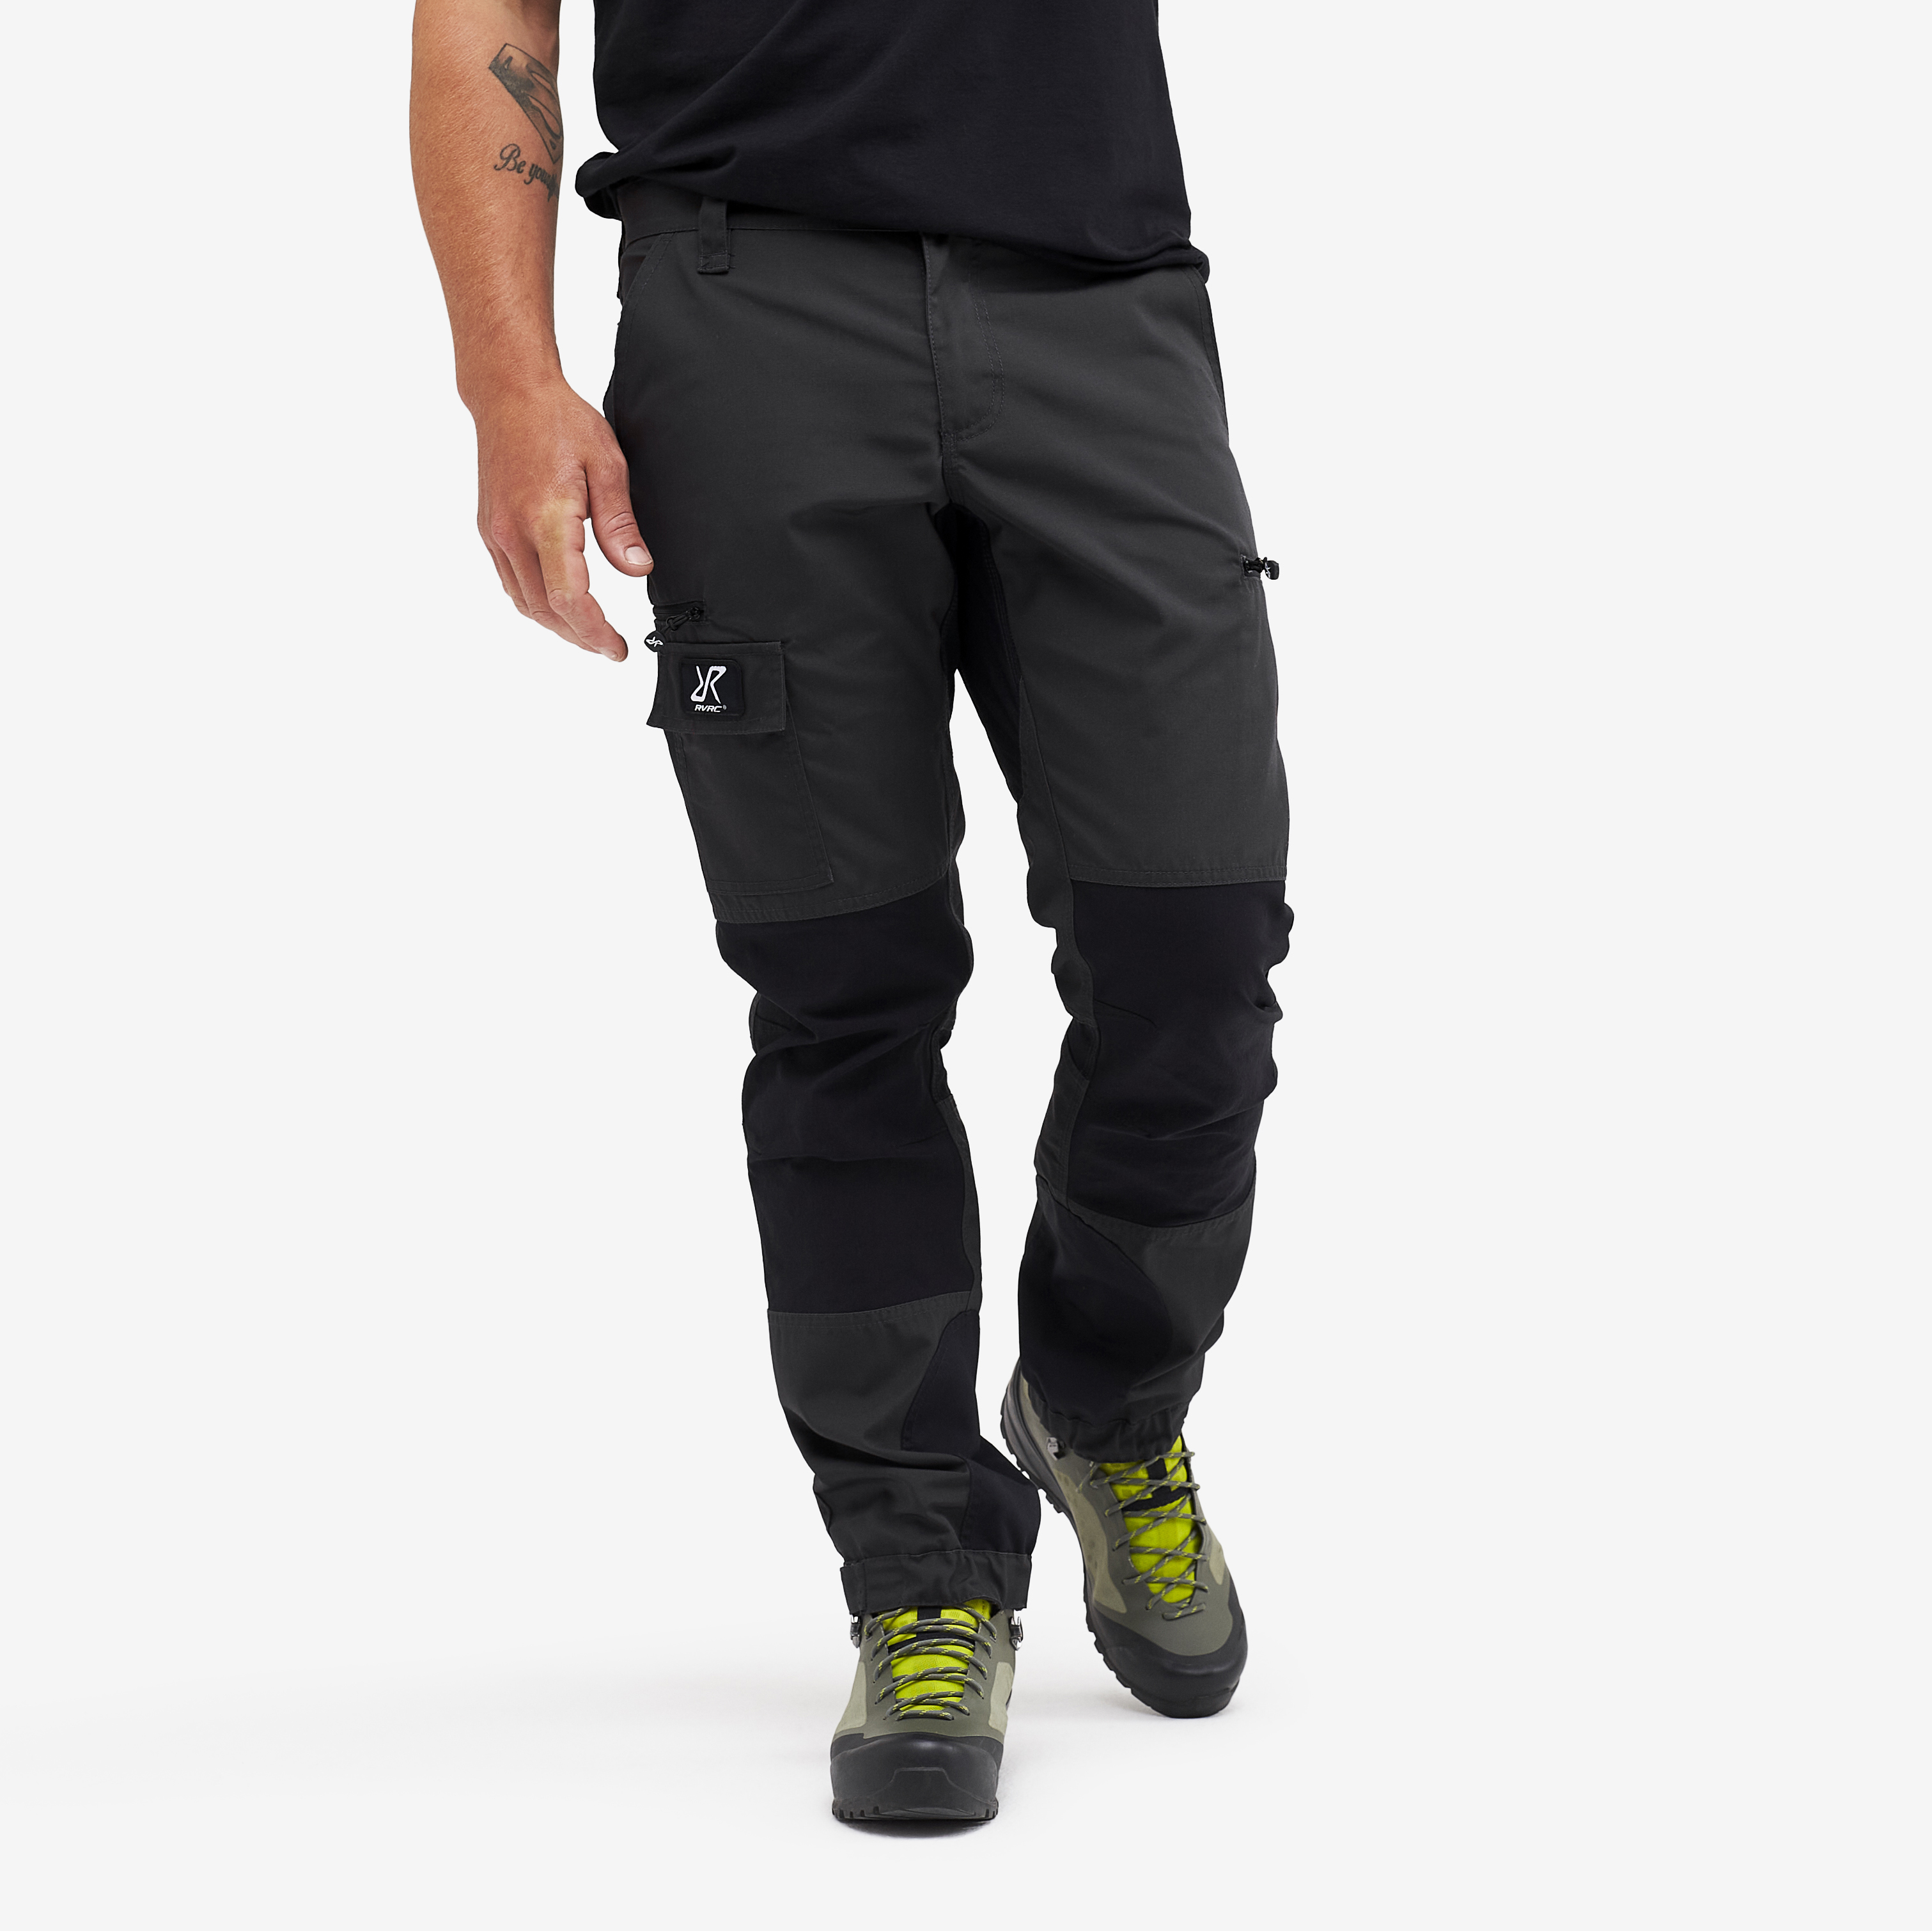 Nordwand Short Pants Anthracite Miehet